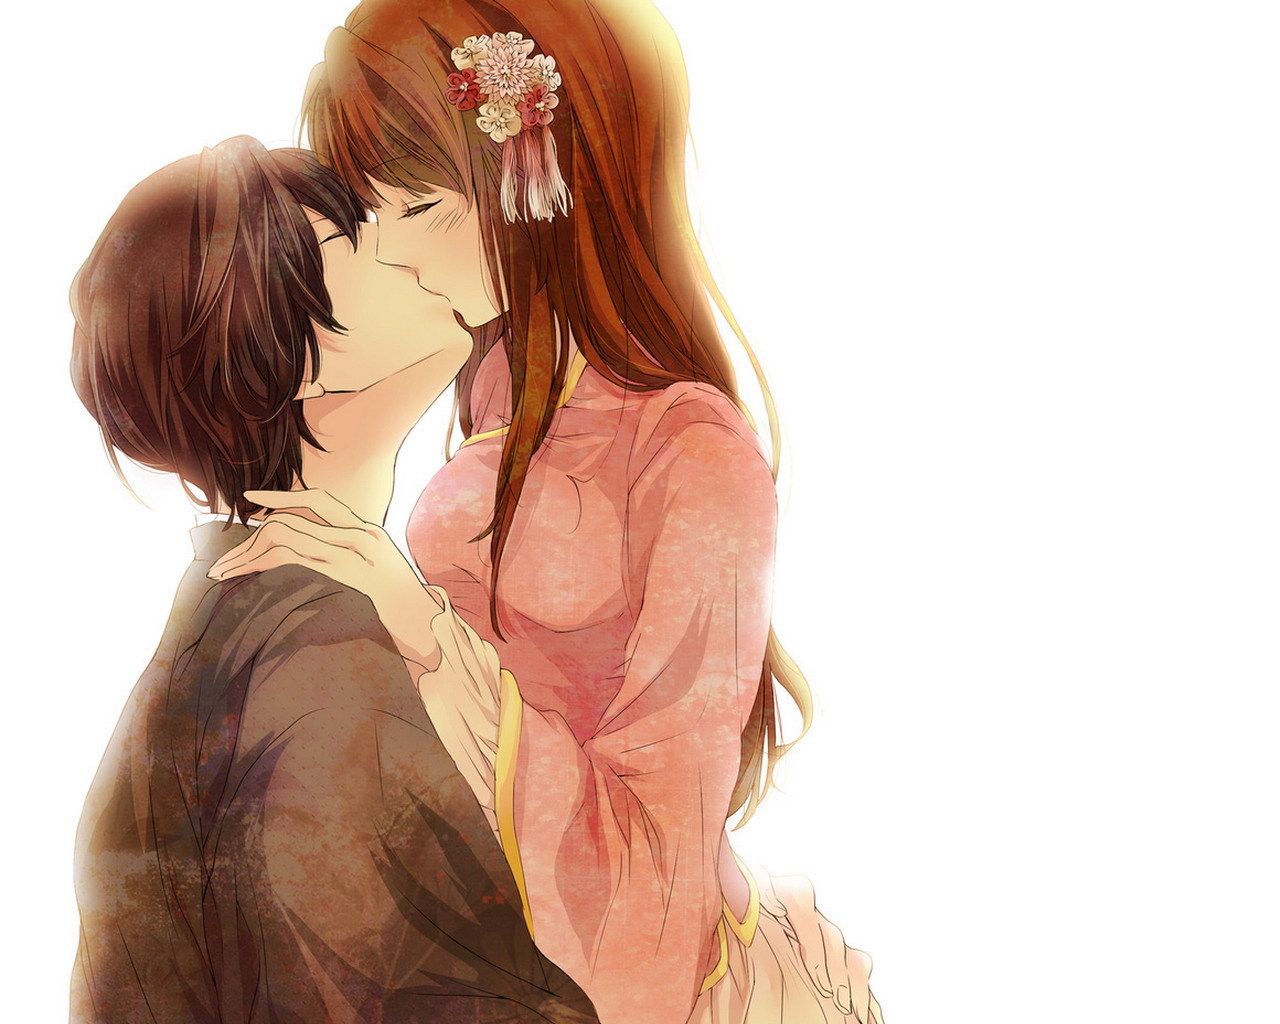 Anime Sweet Kissing Couple Wallpapers - Wallpaper Cave